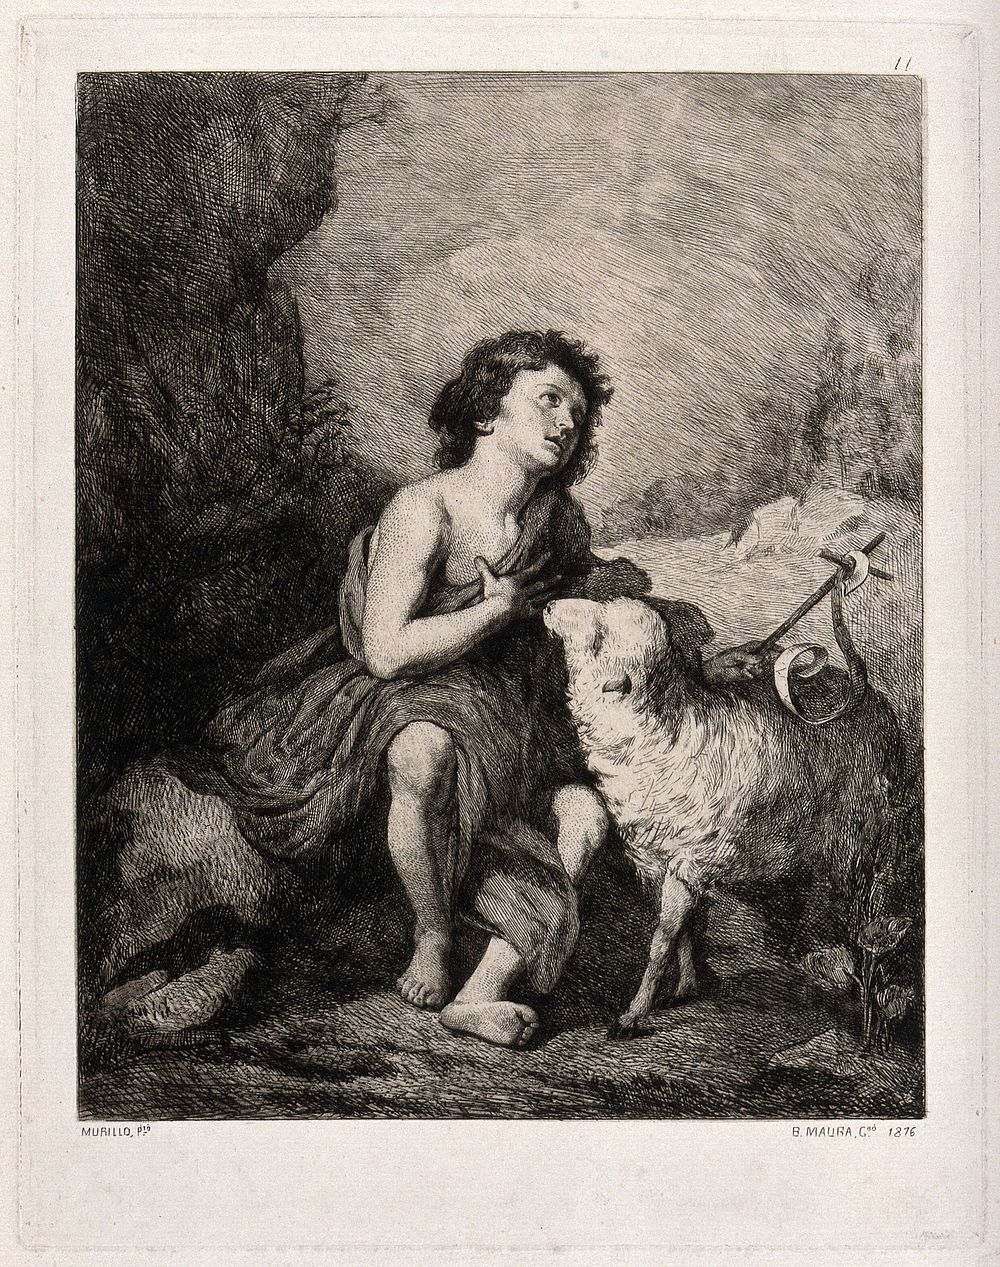 Saint John the Baptist as a child, seated, holding a cross, with a lamb. Etching by B. Maura after B.E. Murillo, 1876.